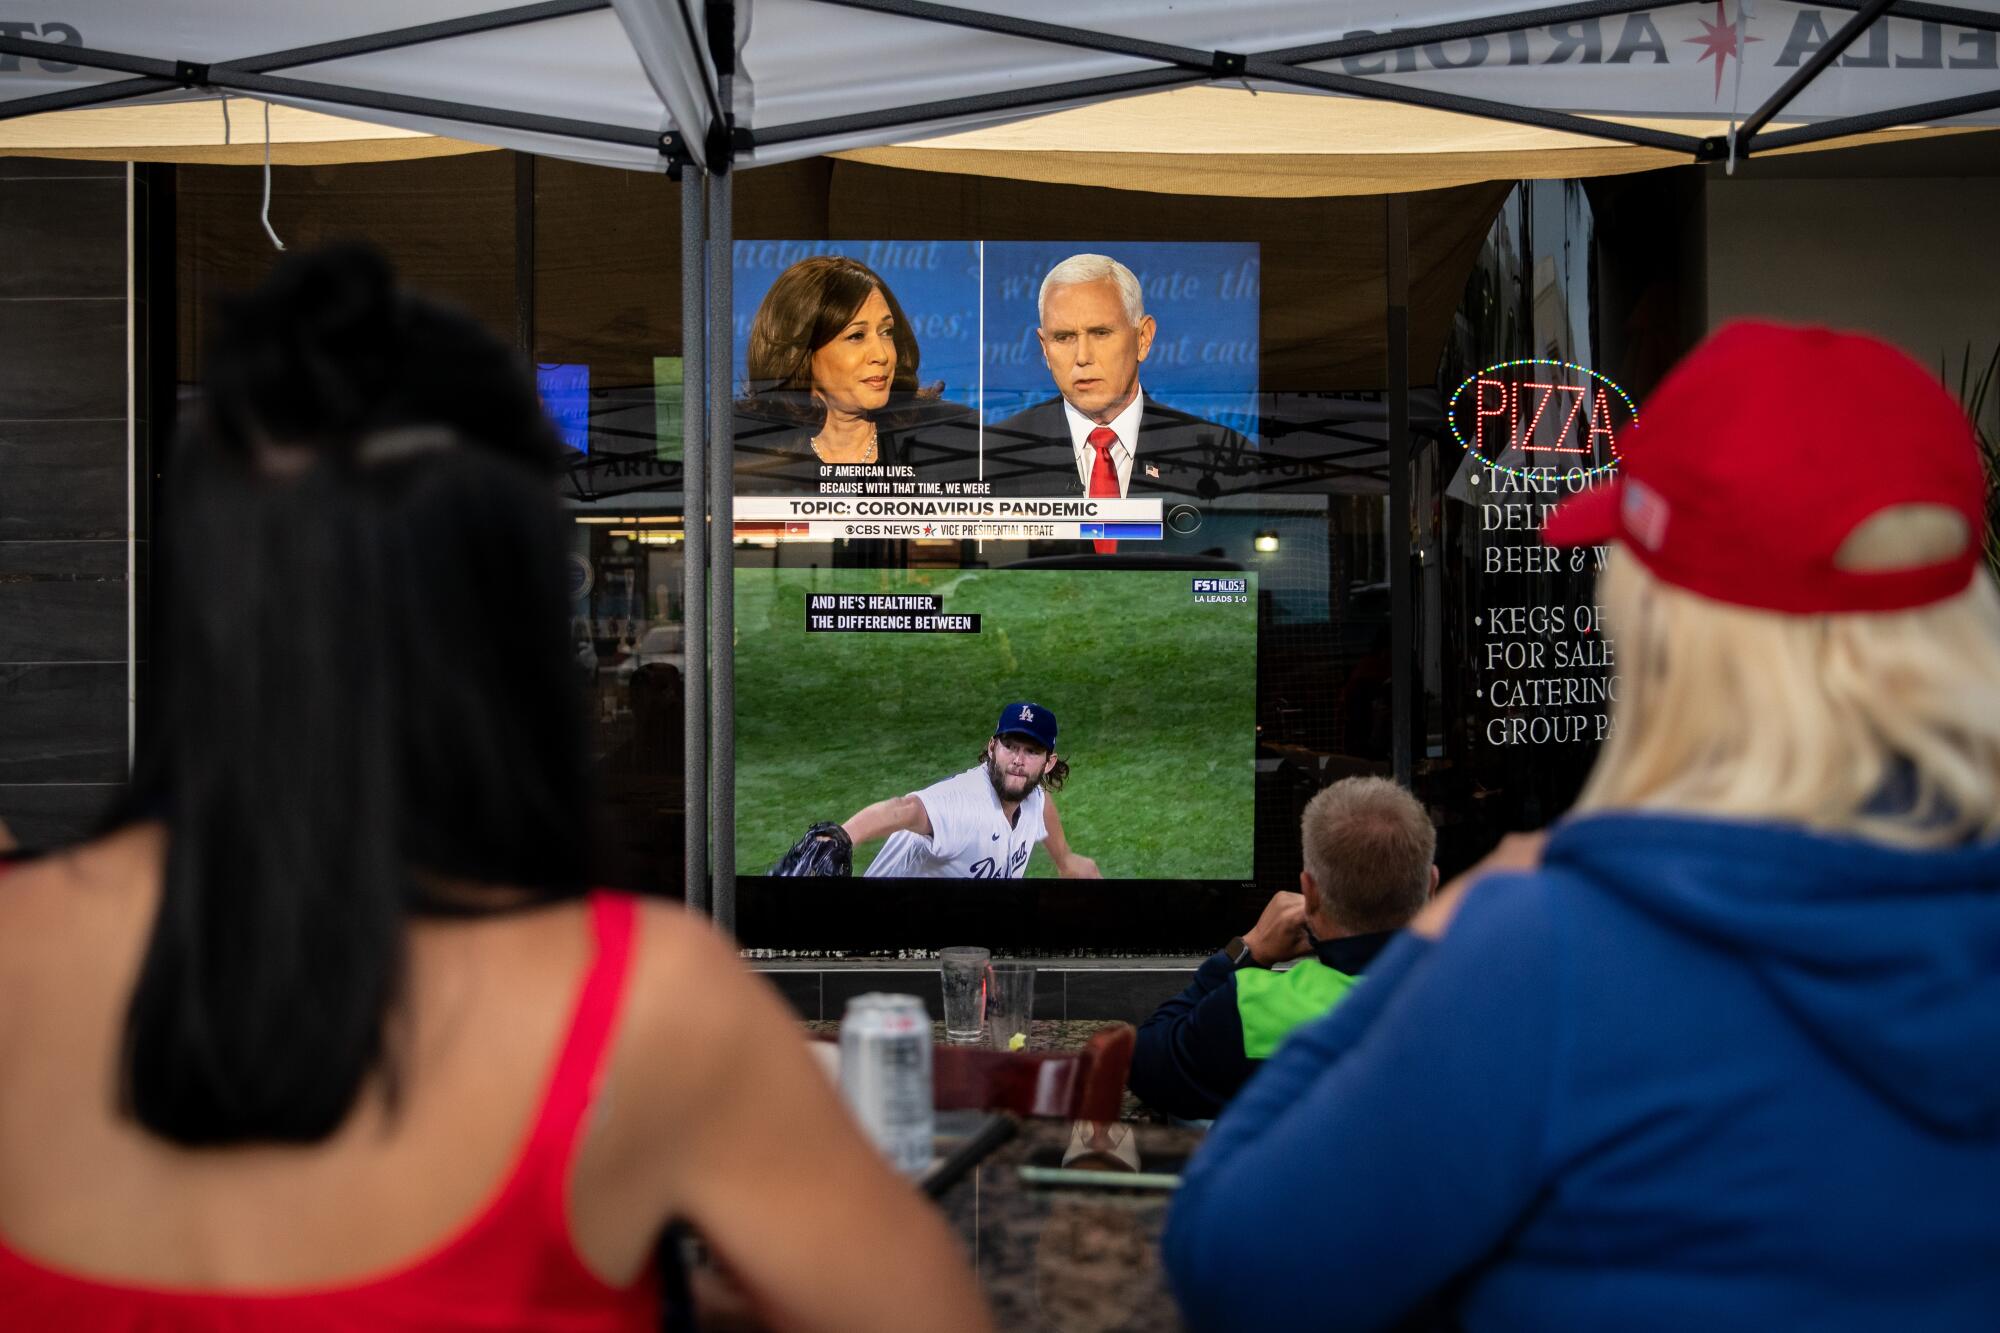 TVs show the debate and the Dodgers playoff game